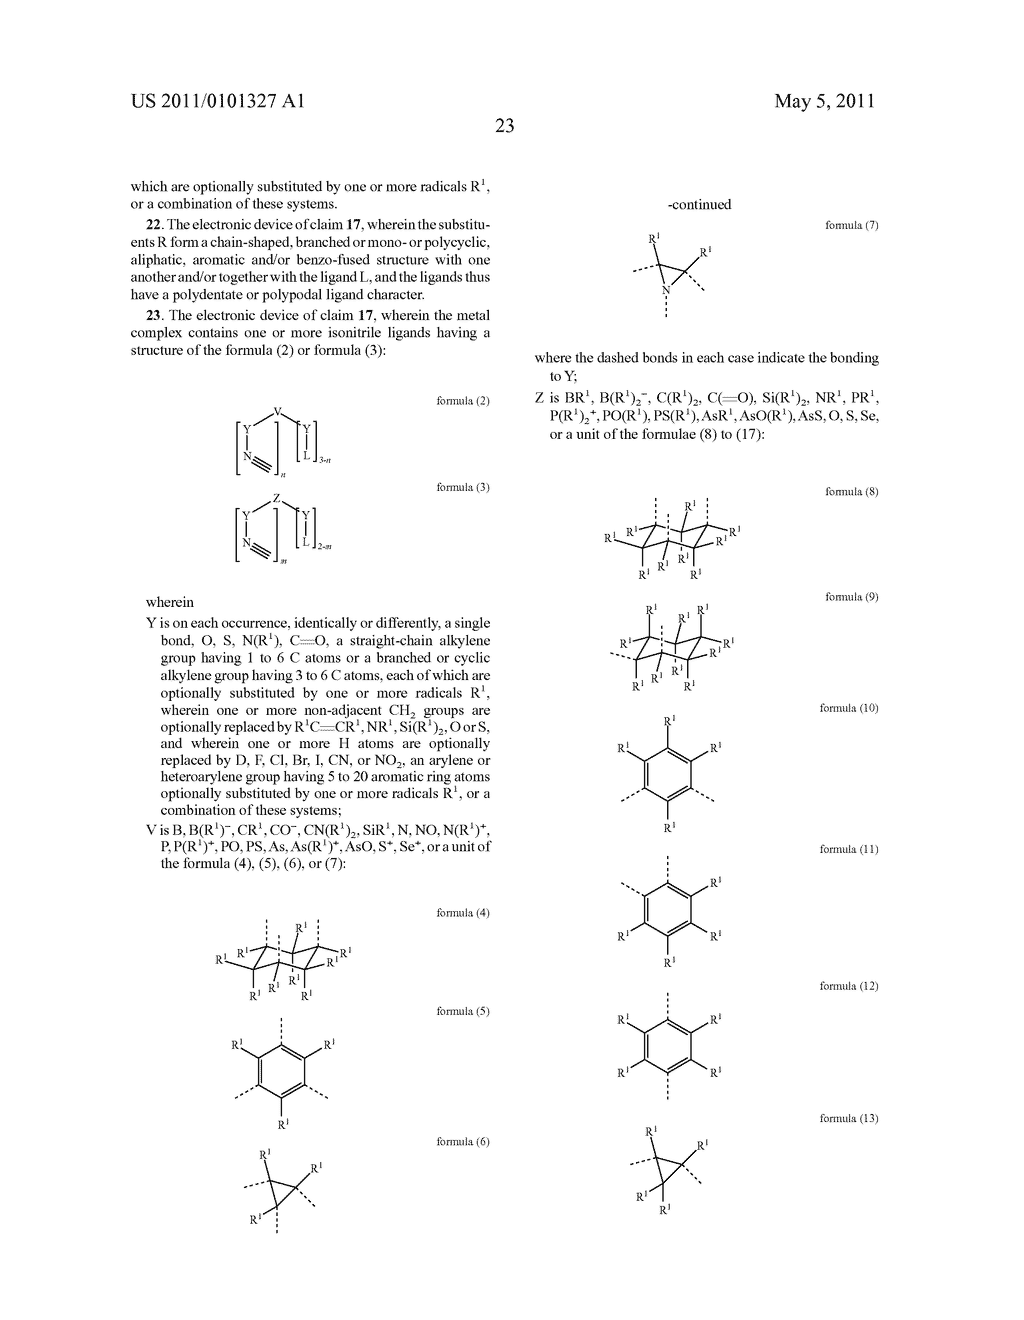 Electronic Devices Comprising Metal Complexes Having Isonitrile Ligands - diagram, schematic, and image 24